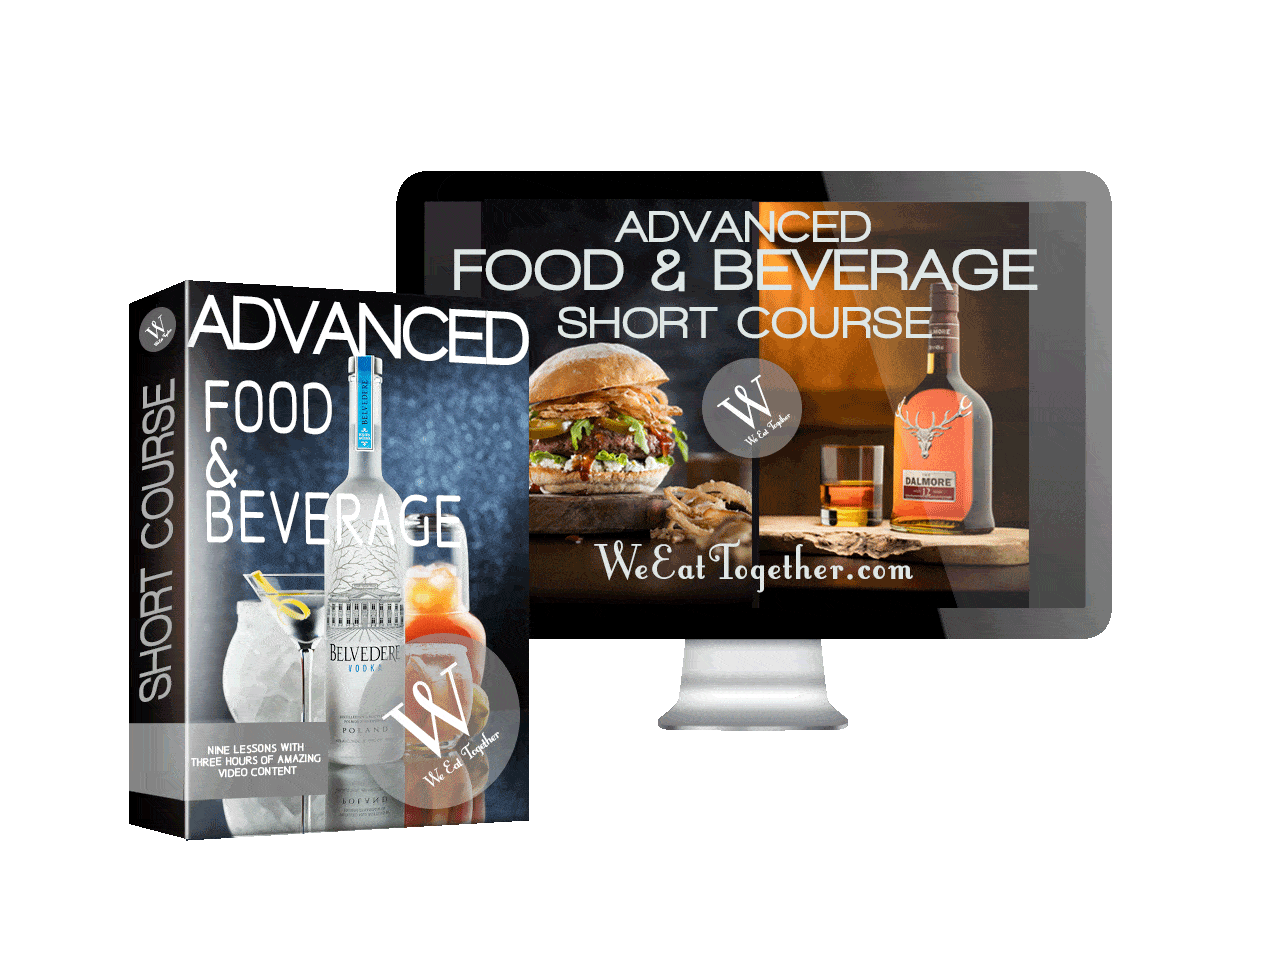 Advanced Food And Beverage Short Course - WeEatTogether.com